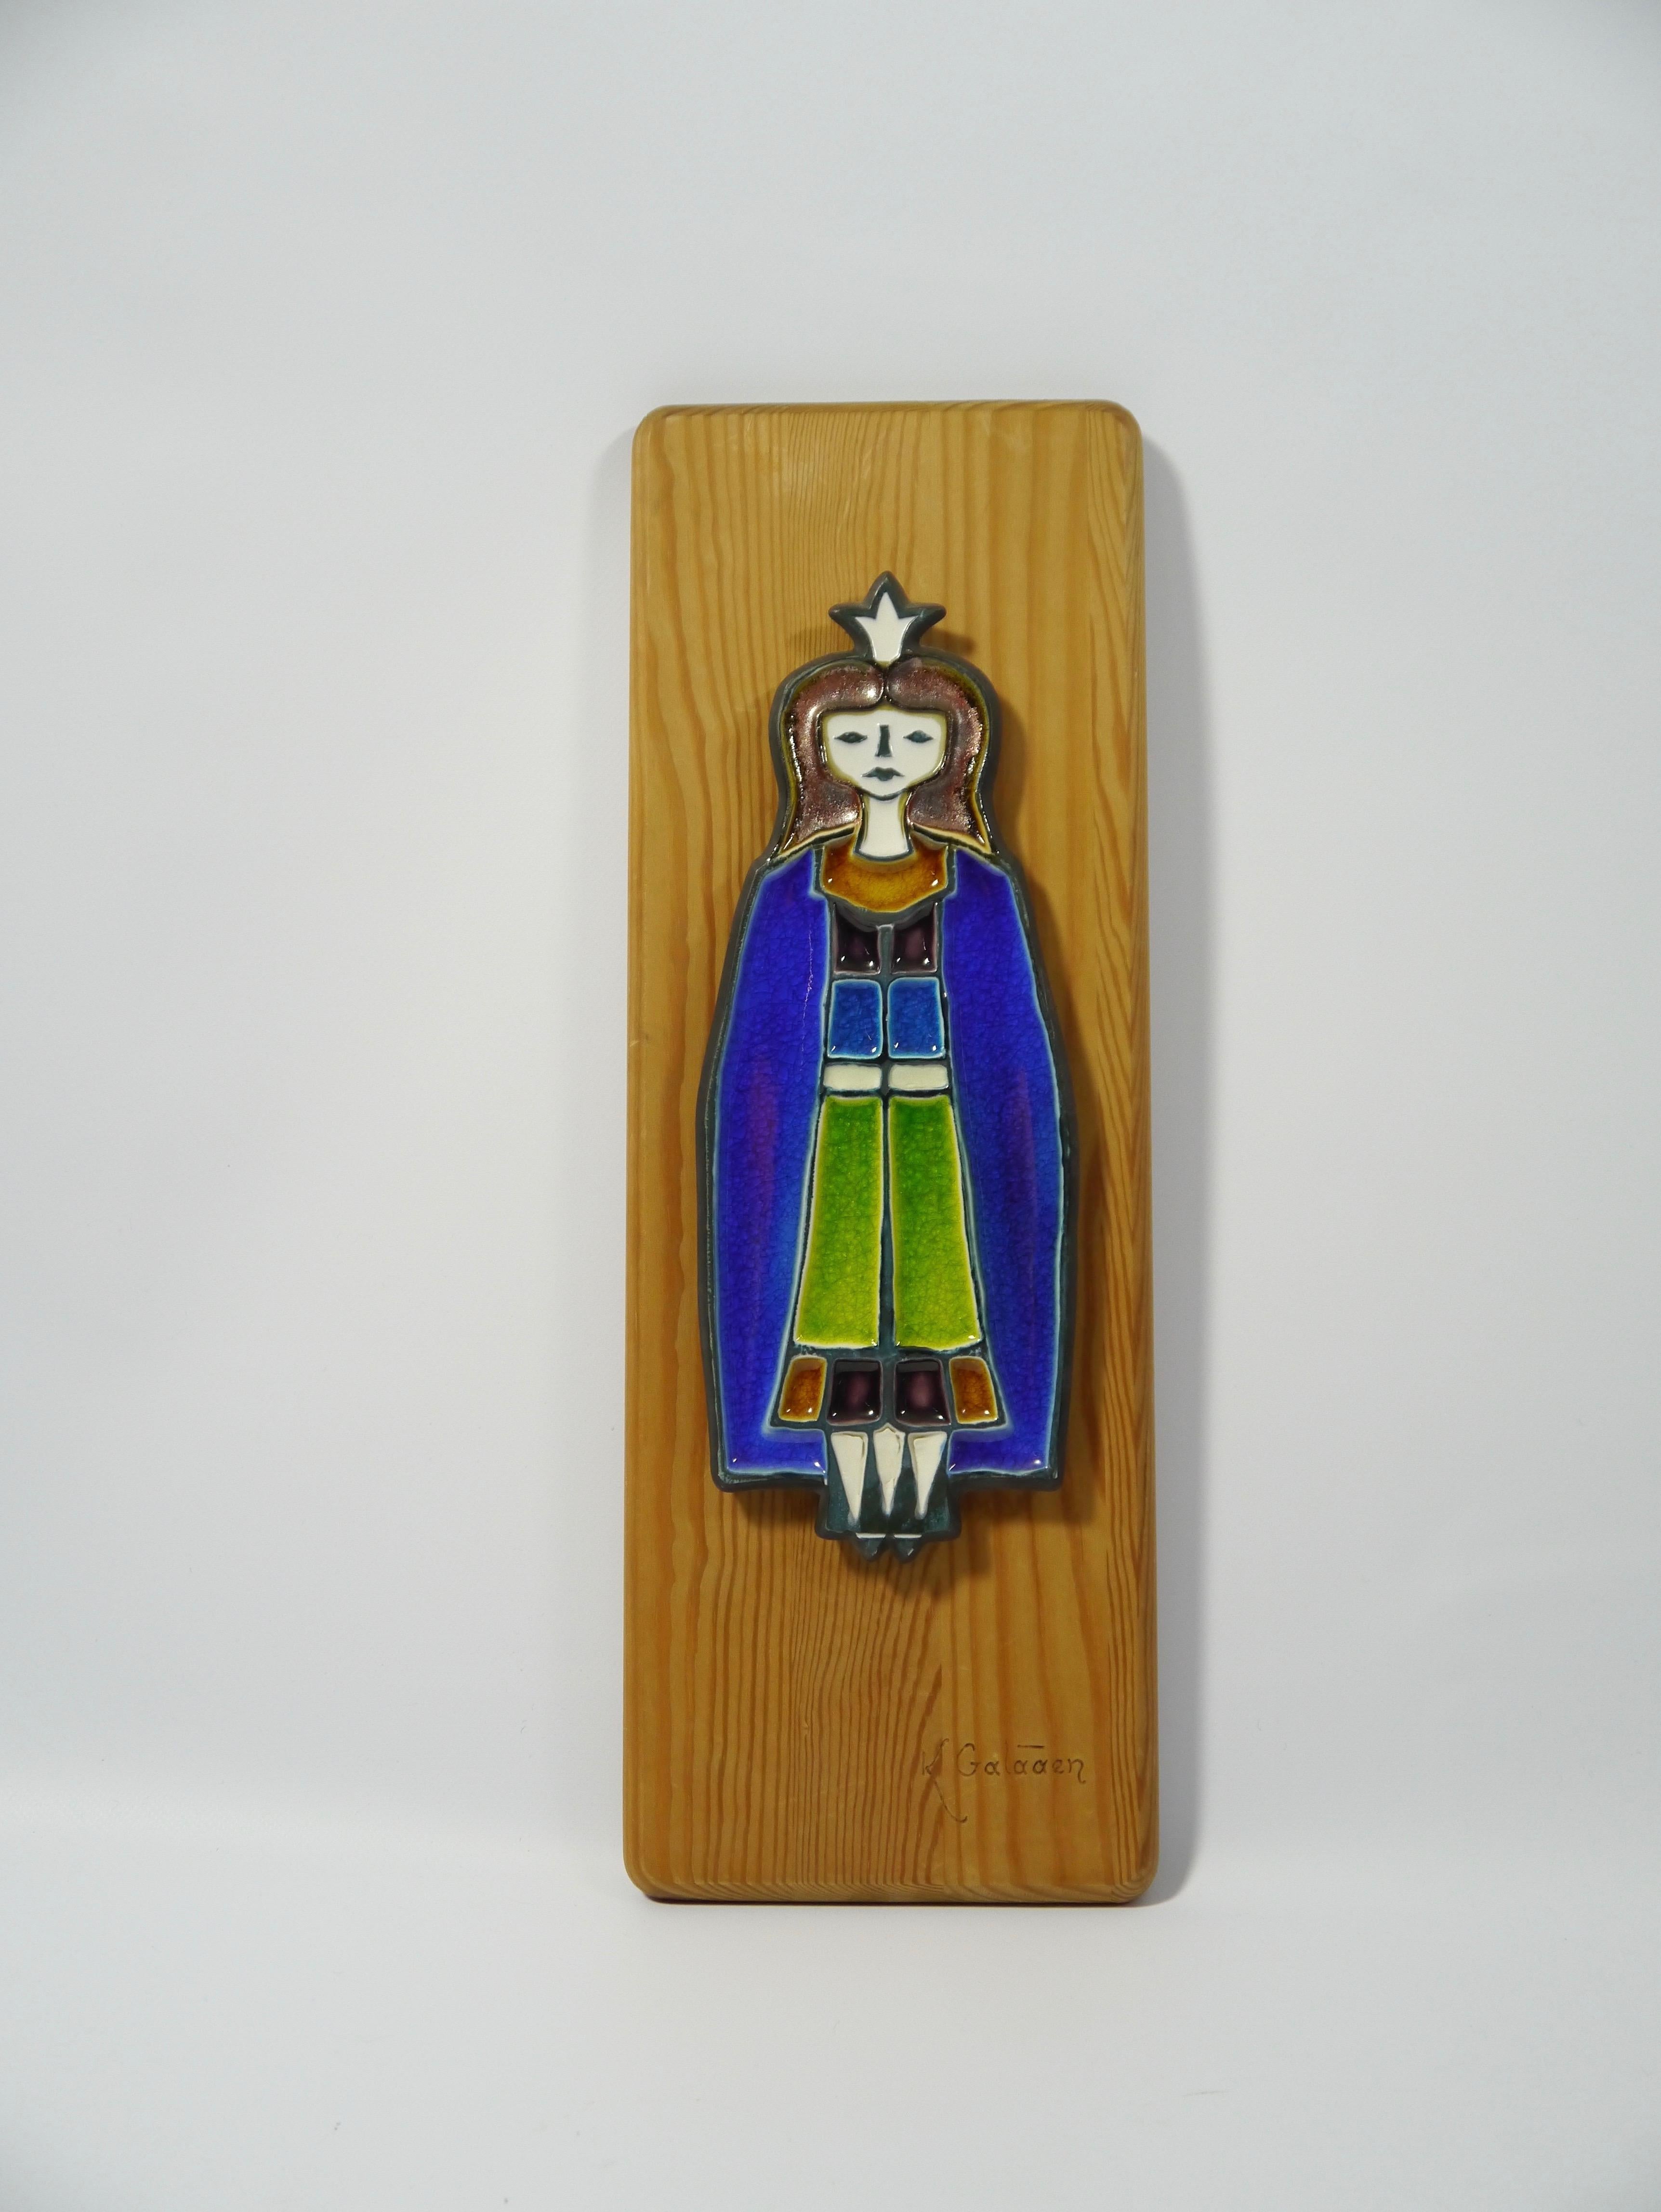 Glazed ceramic princess figure mounted on a pine wall plaque, designed by Konrad Galaaen (1923-2004) and fabricated in the 1950s at Porsgrund Porselænsfabrik (est 1885) in Norway.